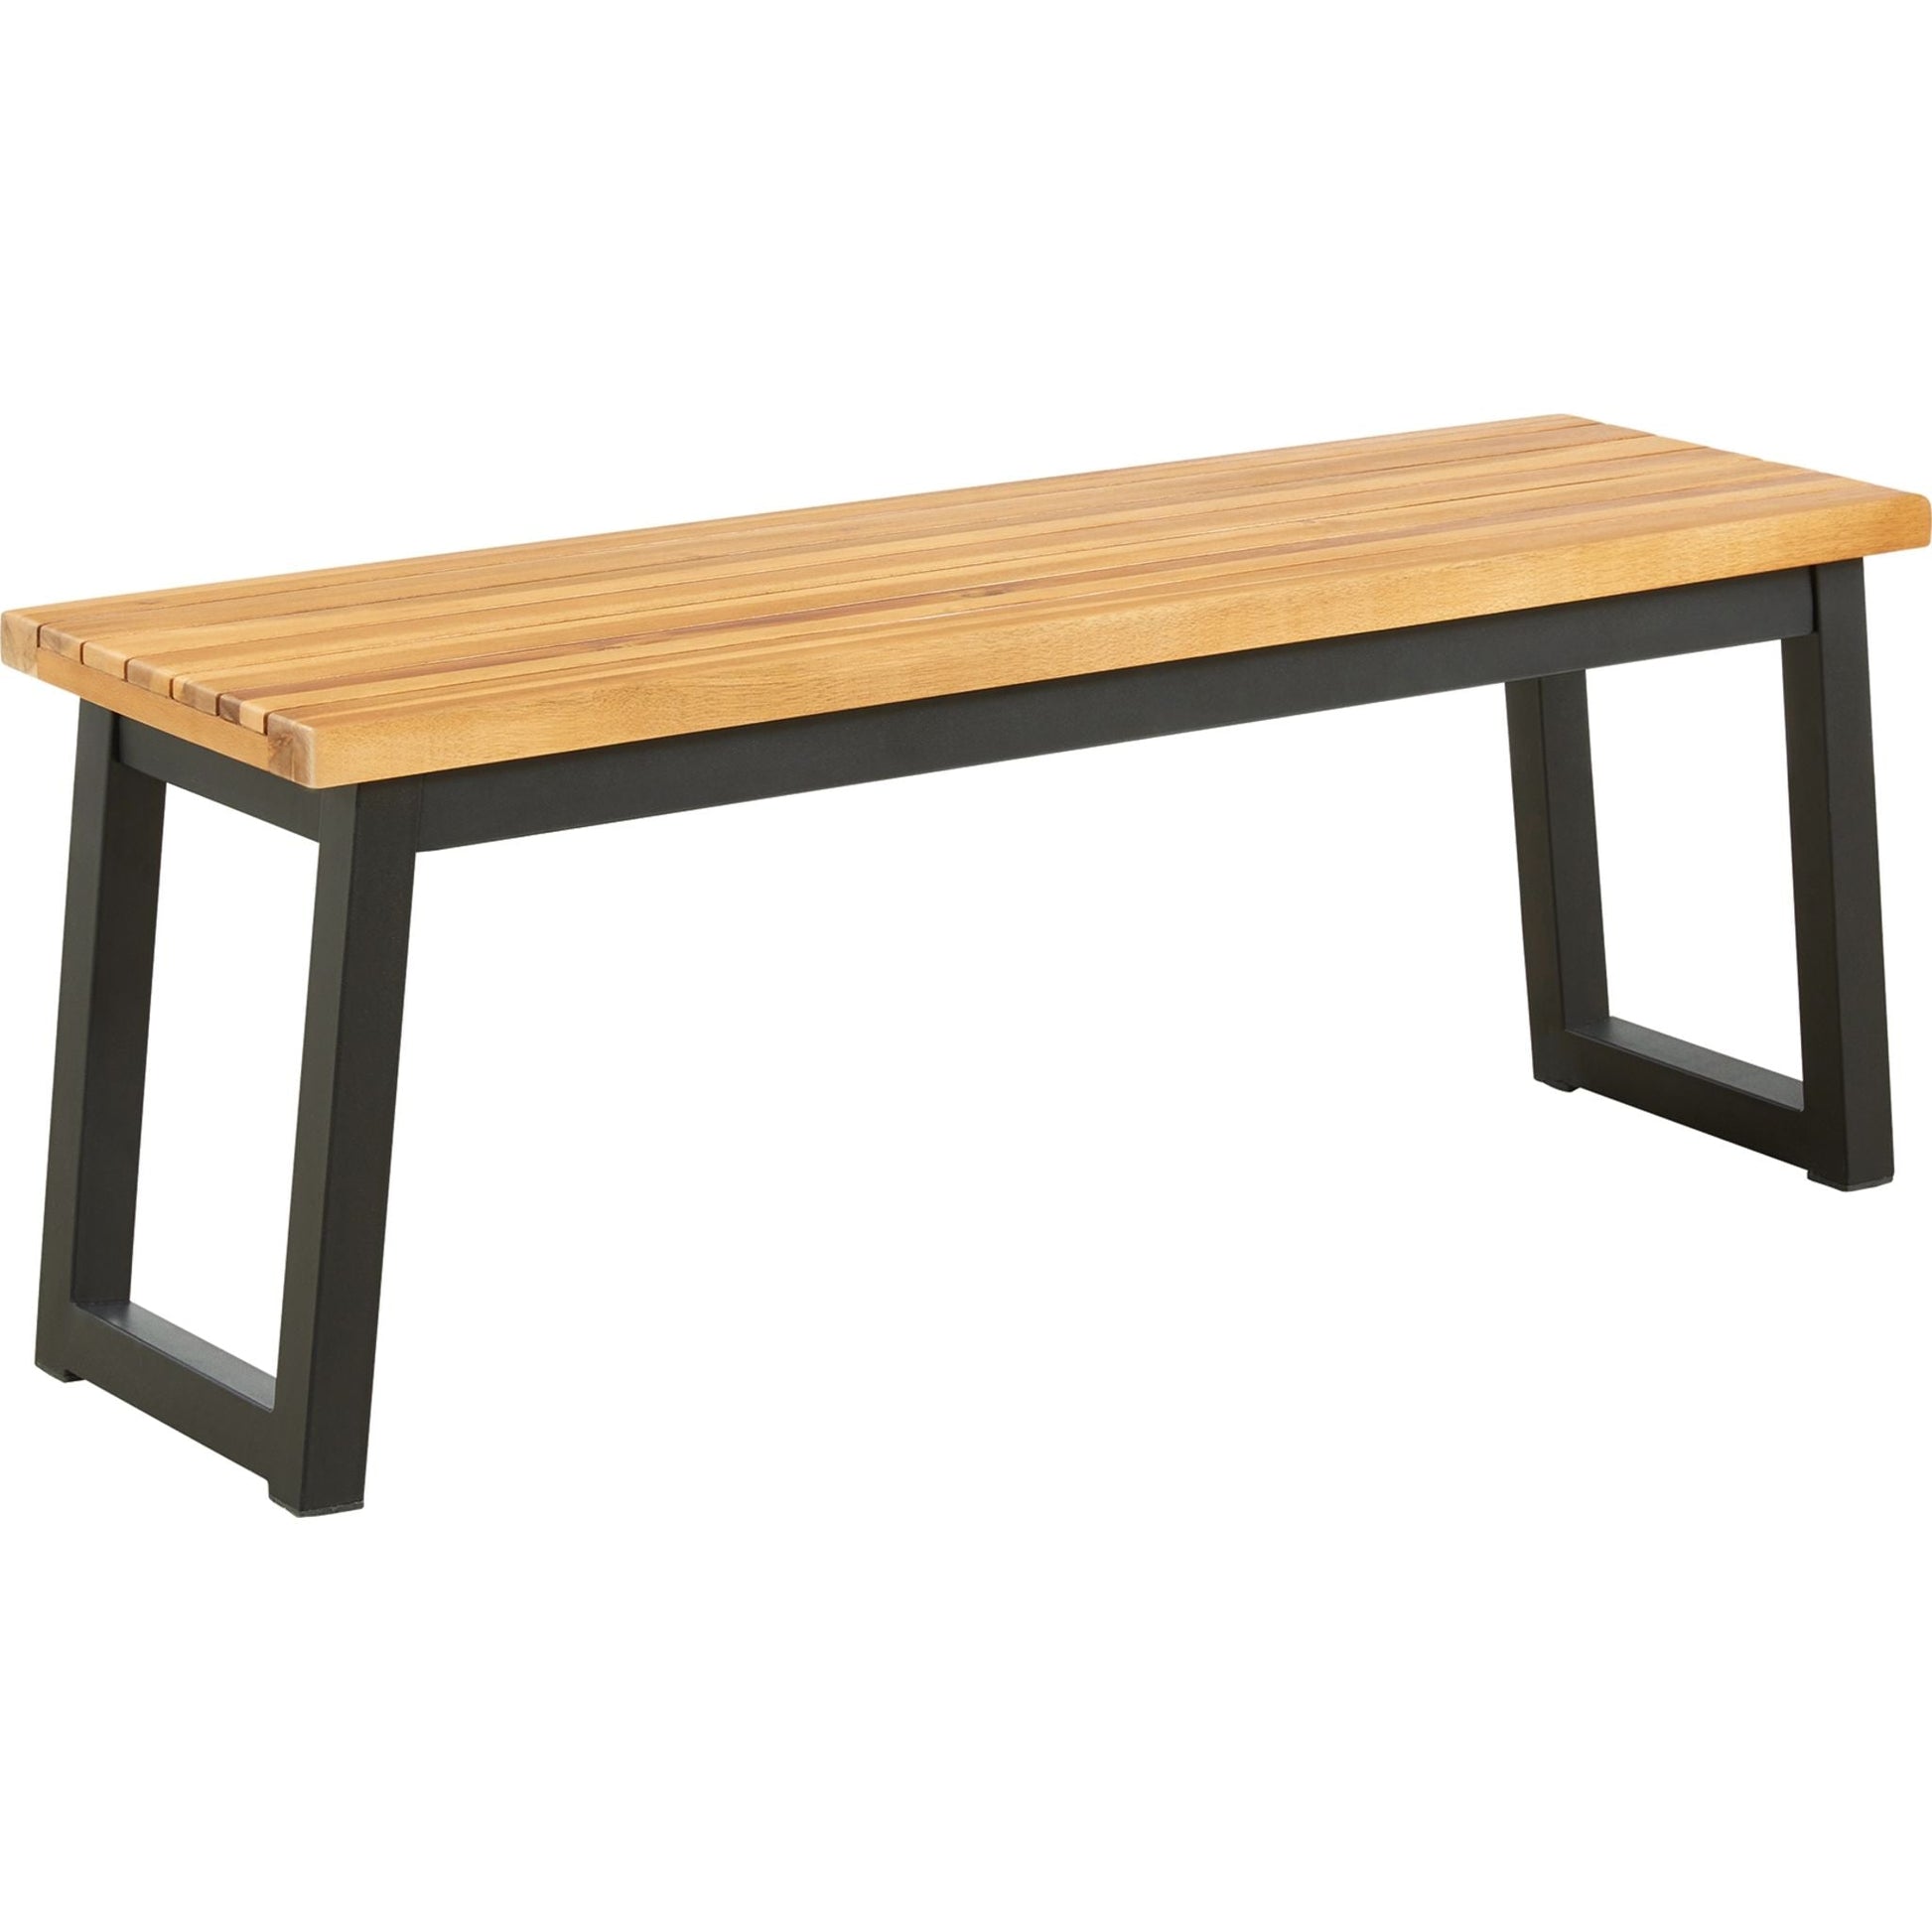 Outdoor Town Wood Table Brown/Black